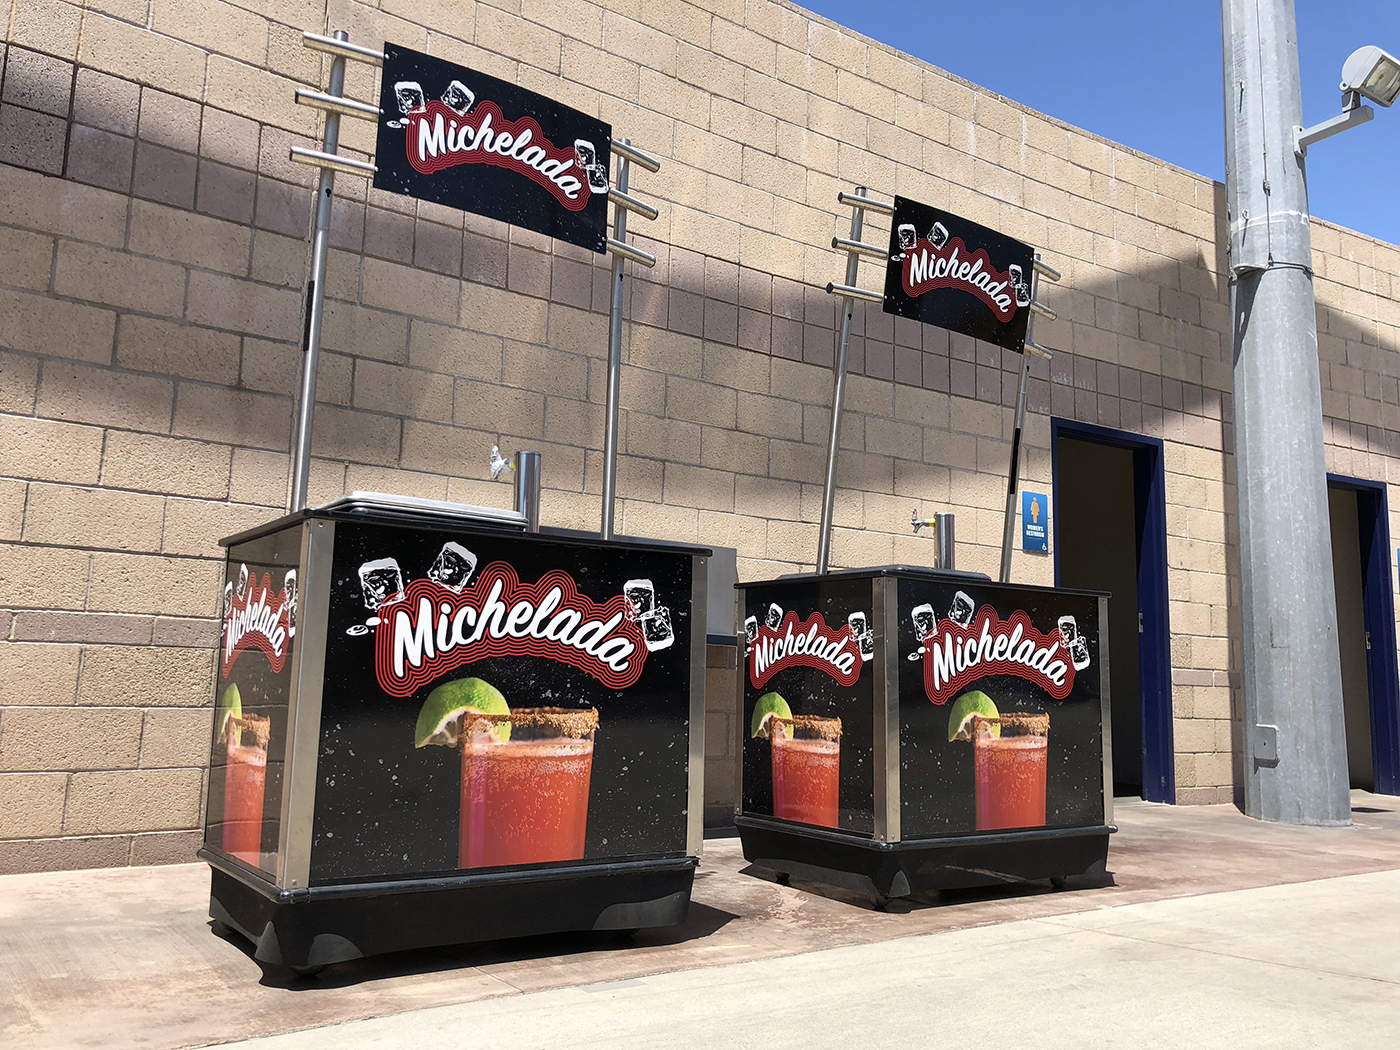 2 wrapped concession stands for Michelada